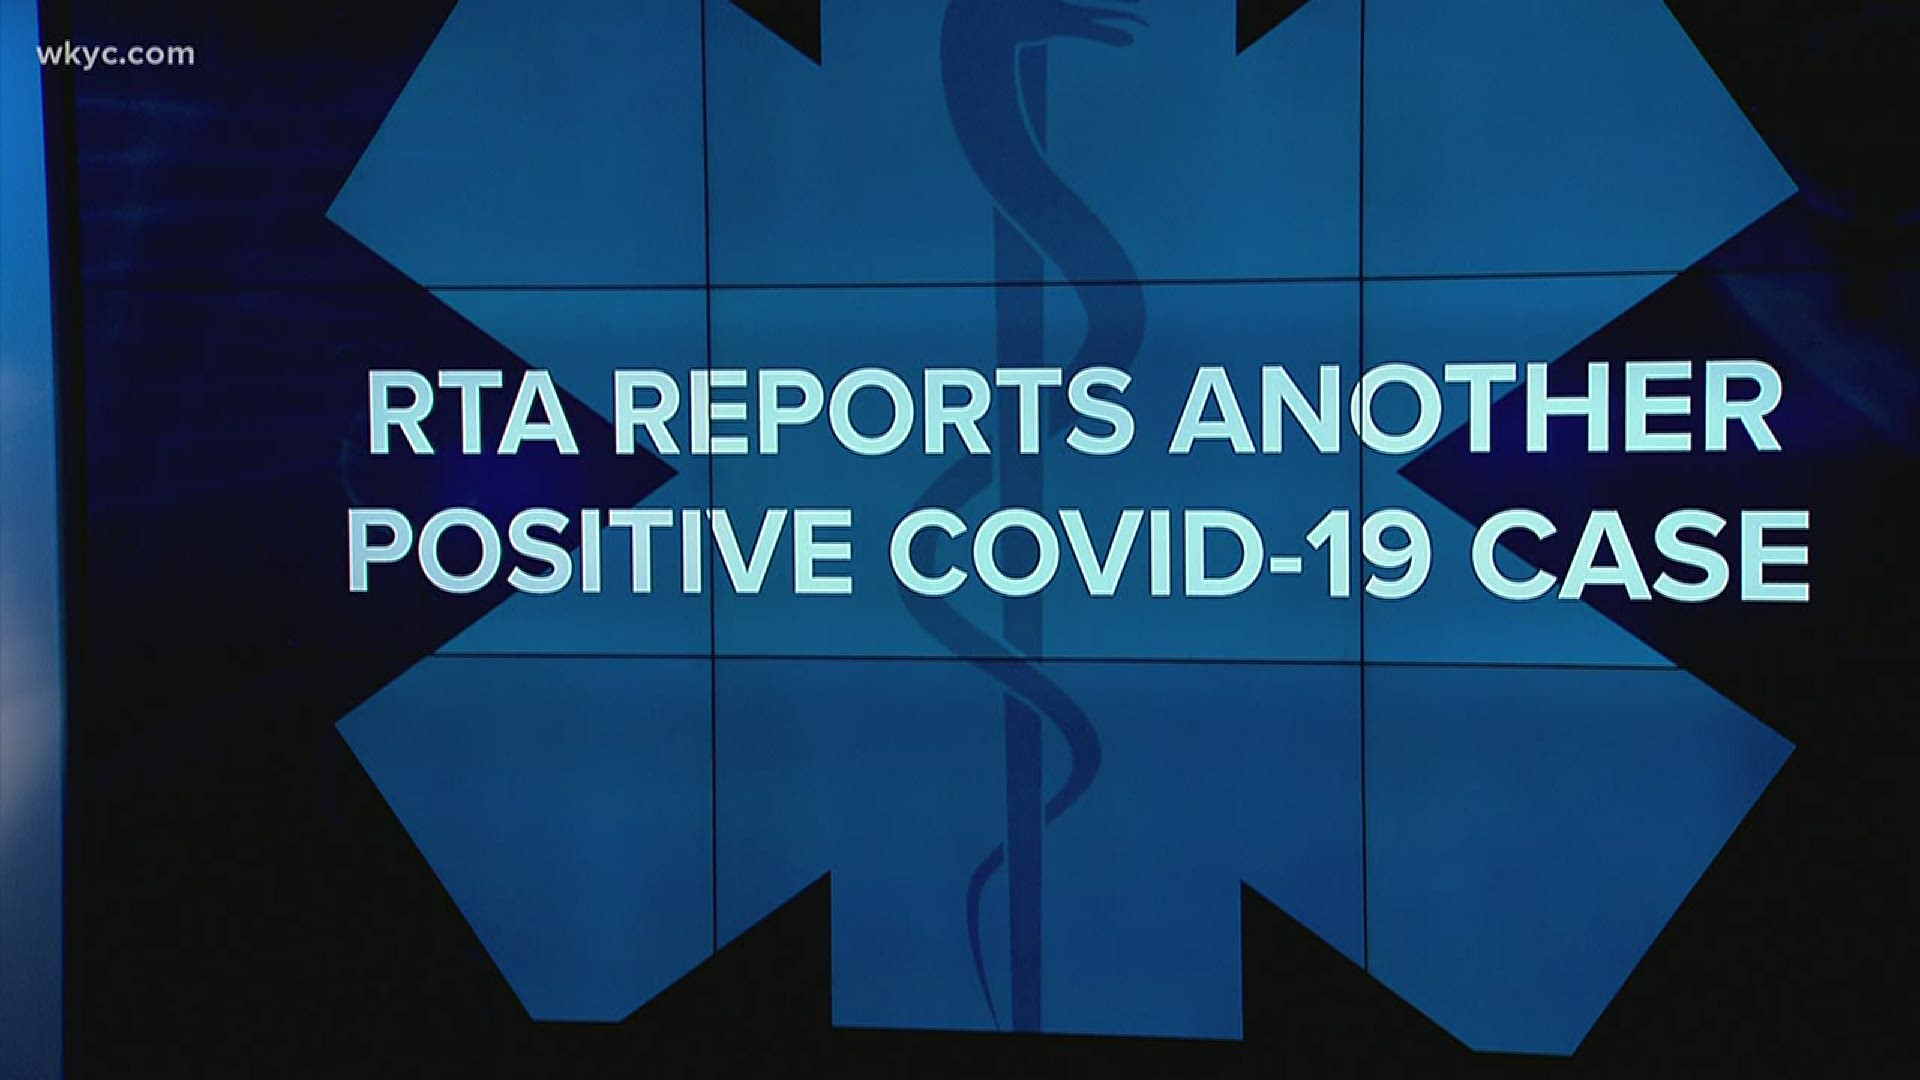 Another employee with the Greater Cleveland Regional Transit Authority has tested positive for COVID-19, bringing the total number of staff members infected to five.